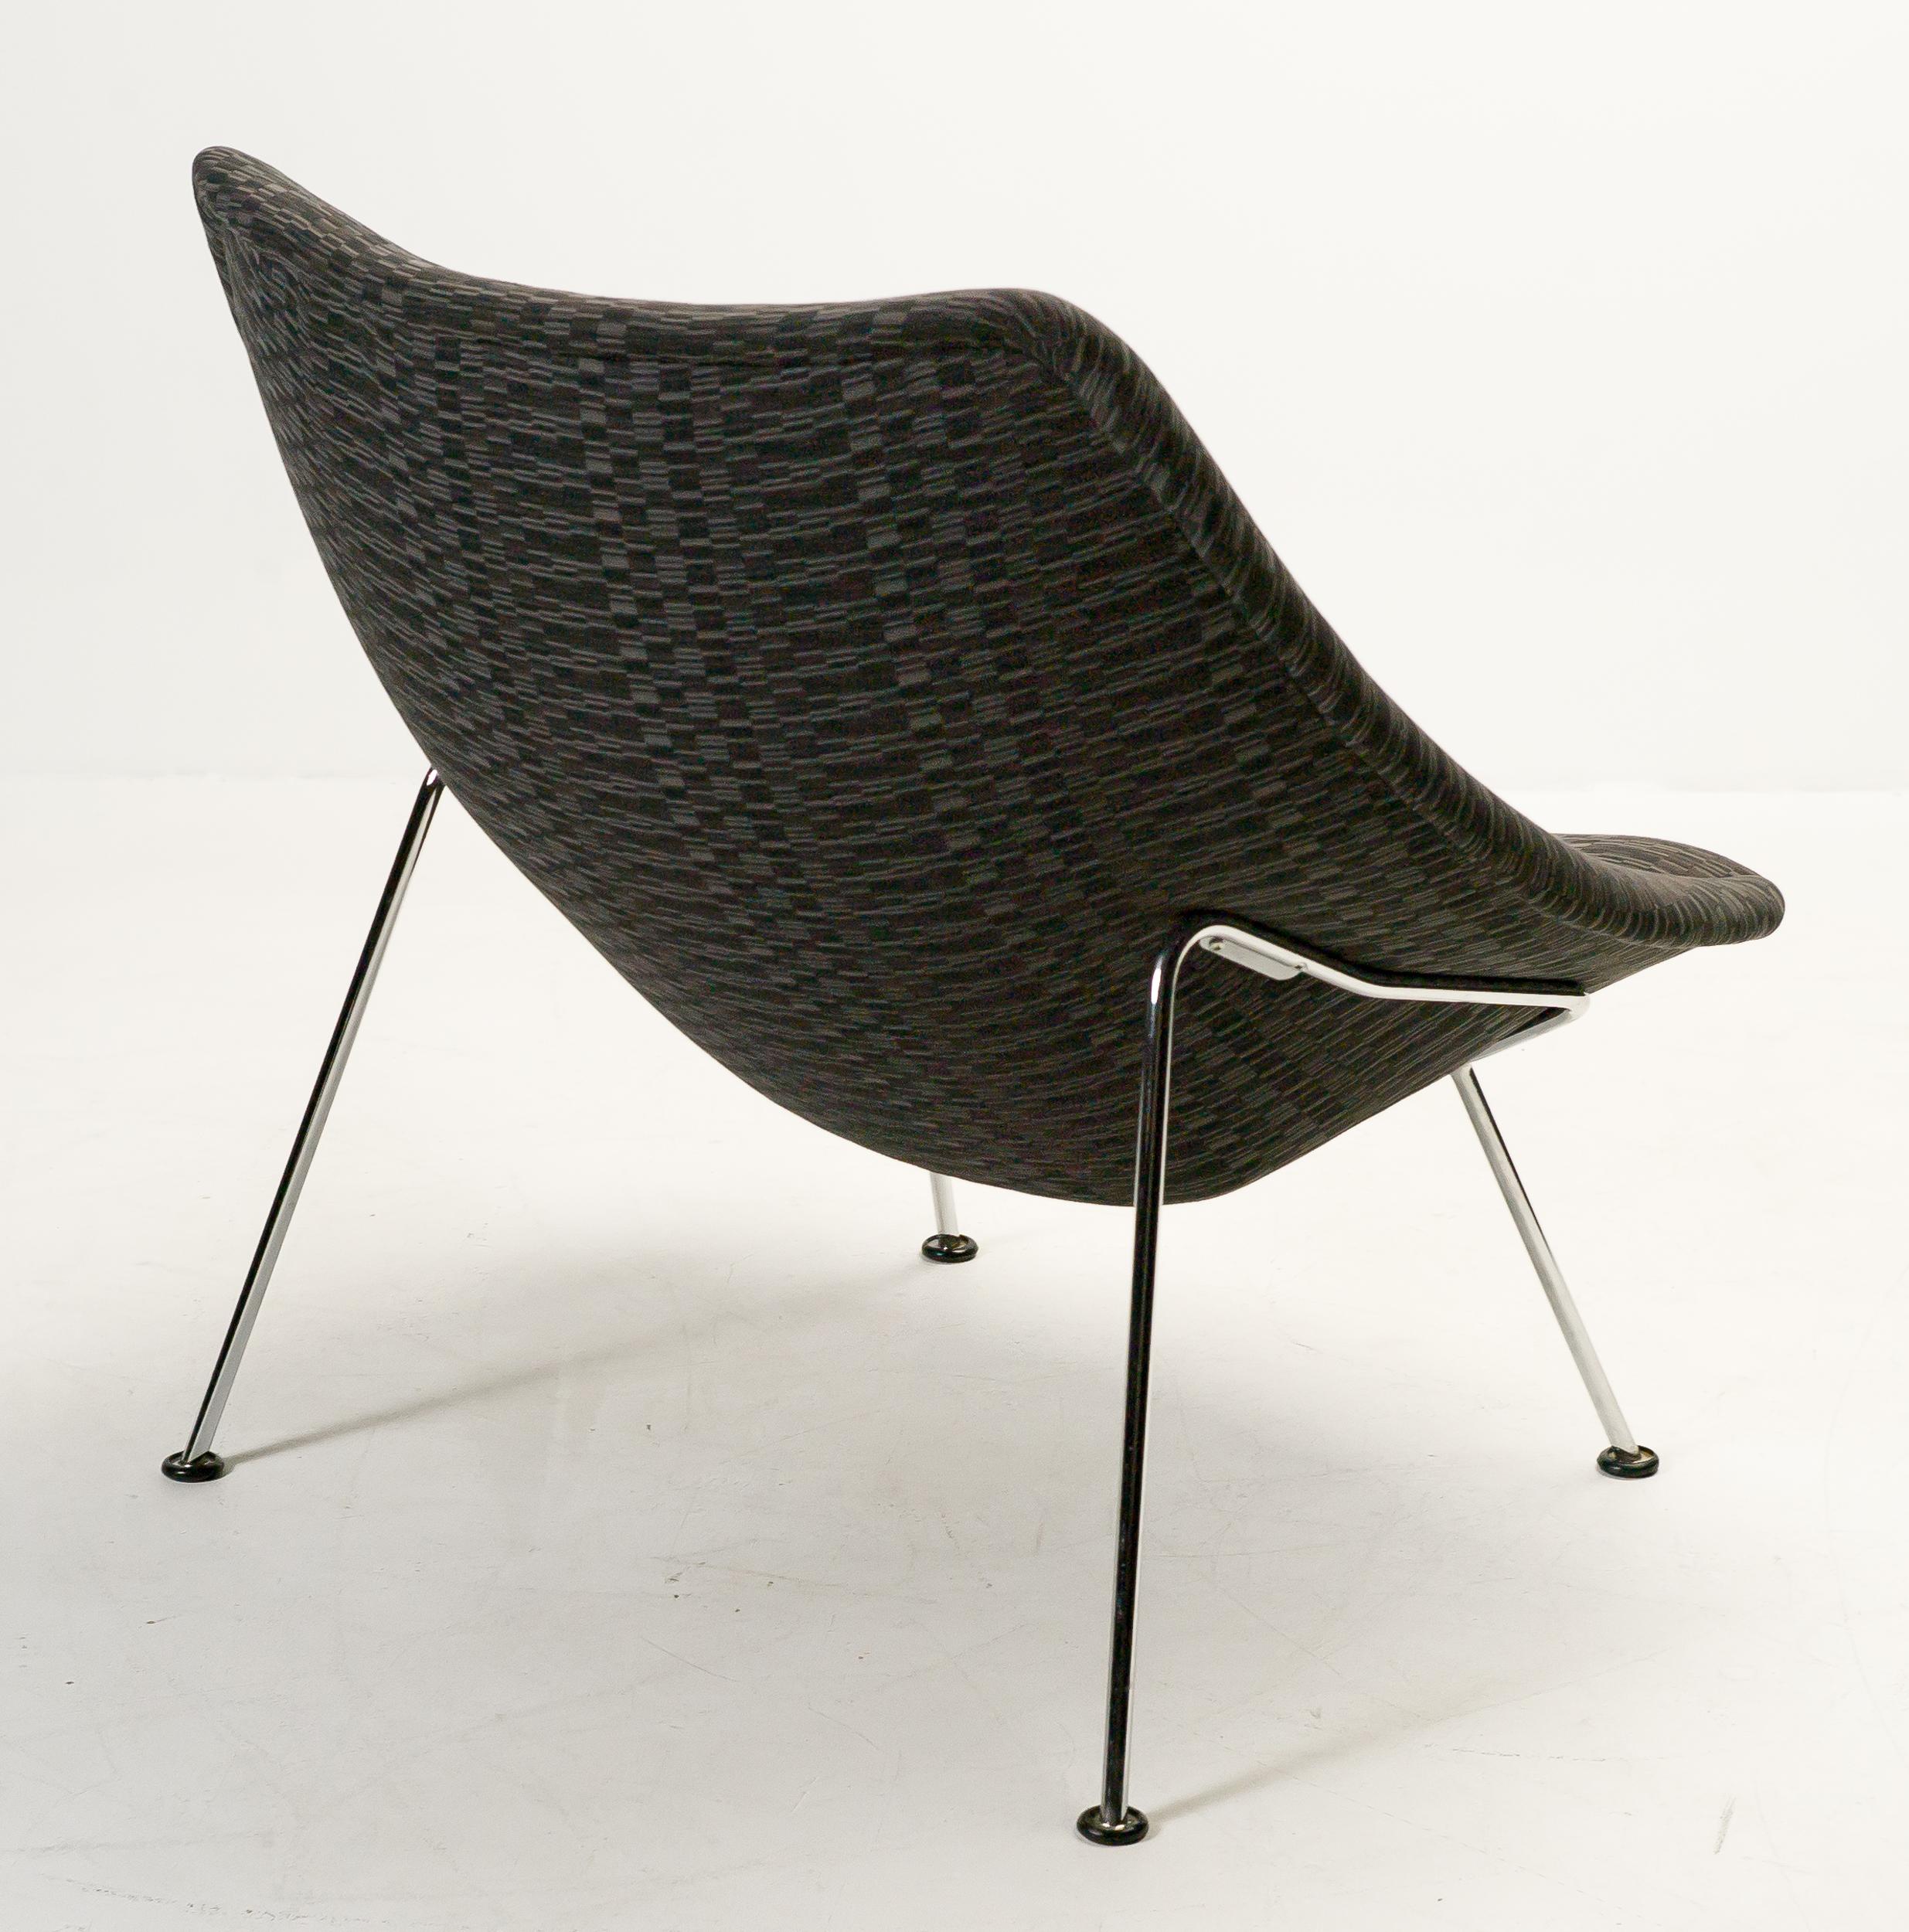 Large version of the Oyster lounge chair designed by Pierre Paulin for Artifort.
The slim lines of the chrome base give this large chair a light appearance.
It was given new foam and reupholstered in a fabric with typical 1950s pattern six years